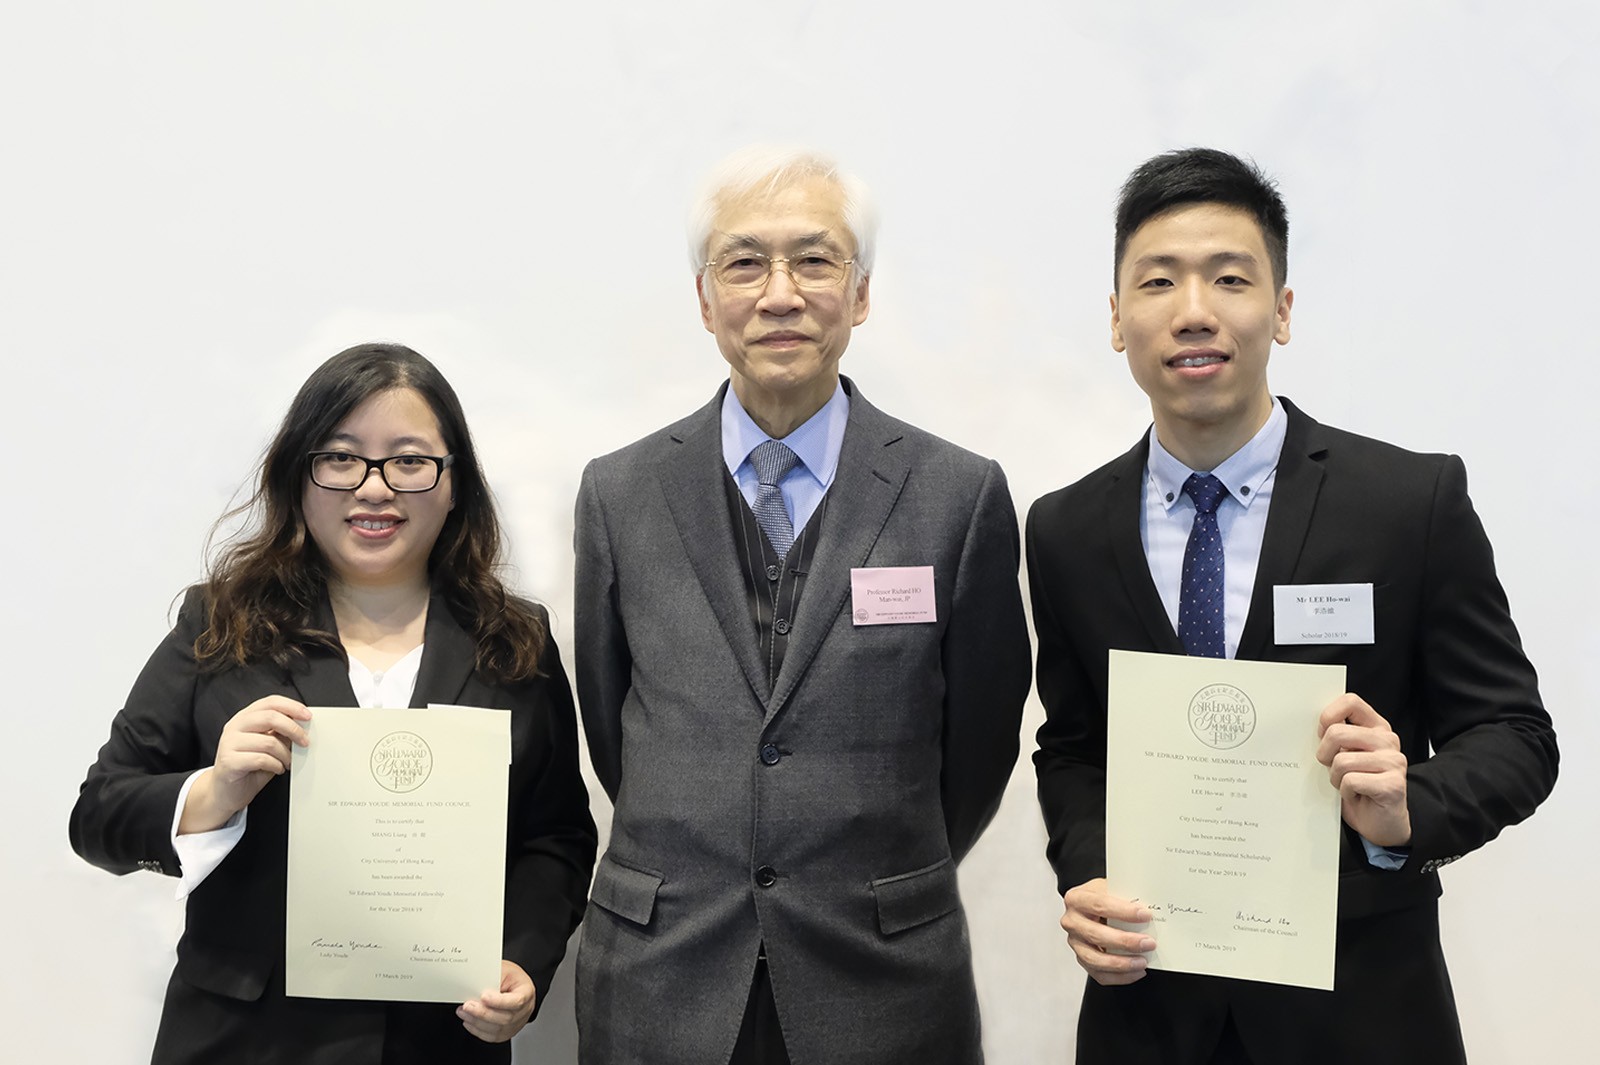 Two students at CityU have been recognised by the Sir Edward Youde Memorial Fund this year for their outstanding academic performance and enthusiasm to serve society. 